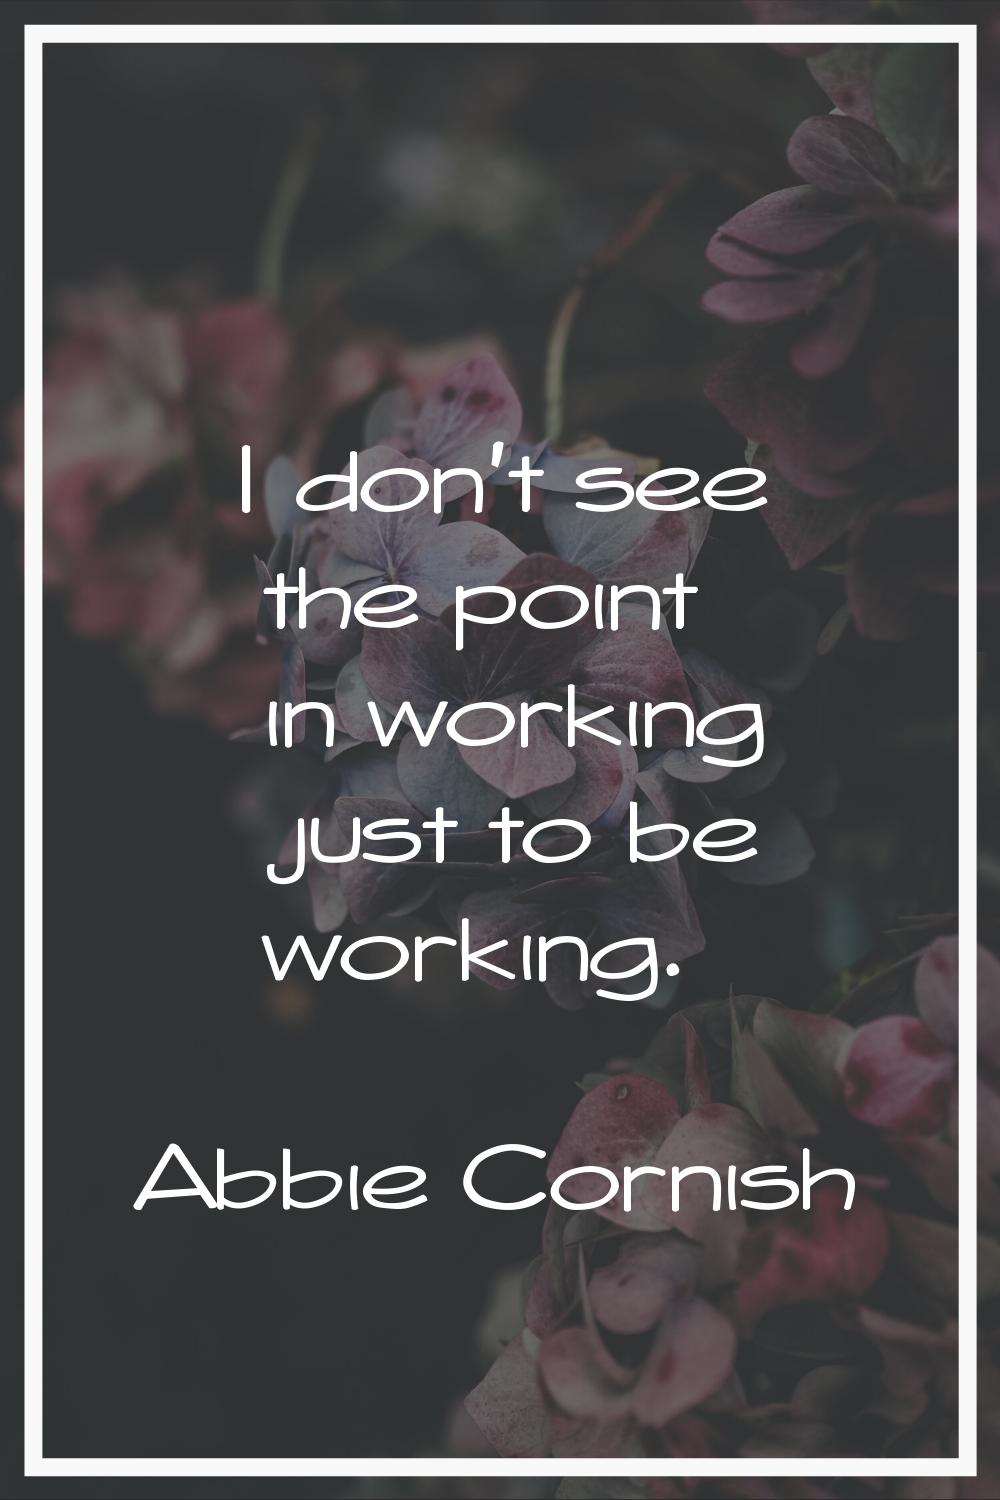 I don't see the point in working just to be working.